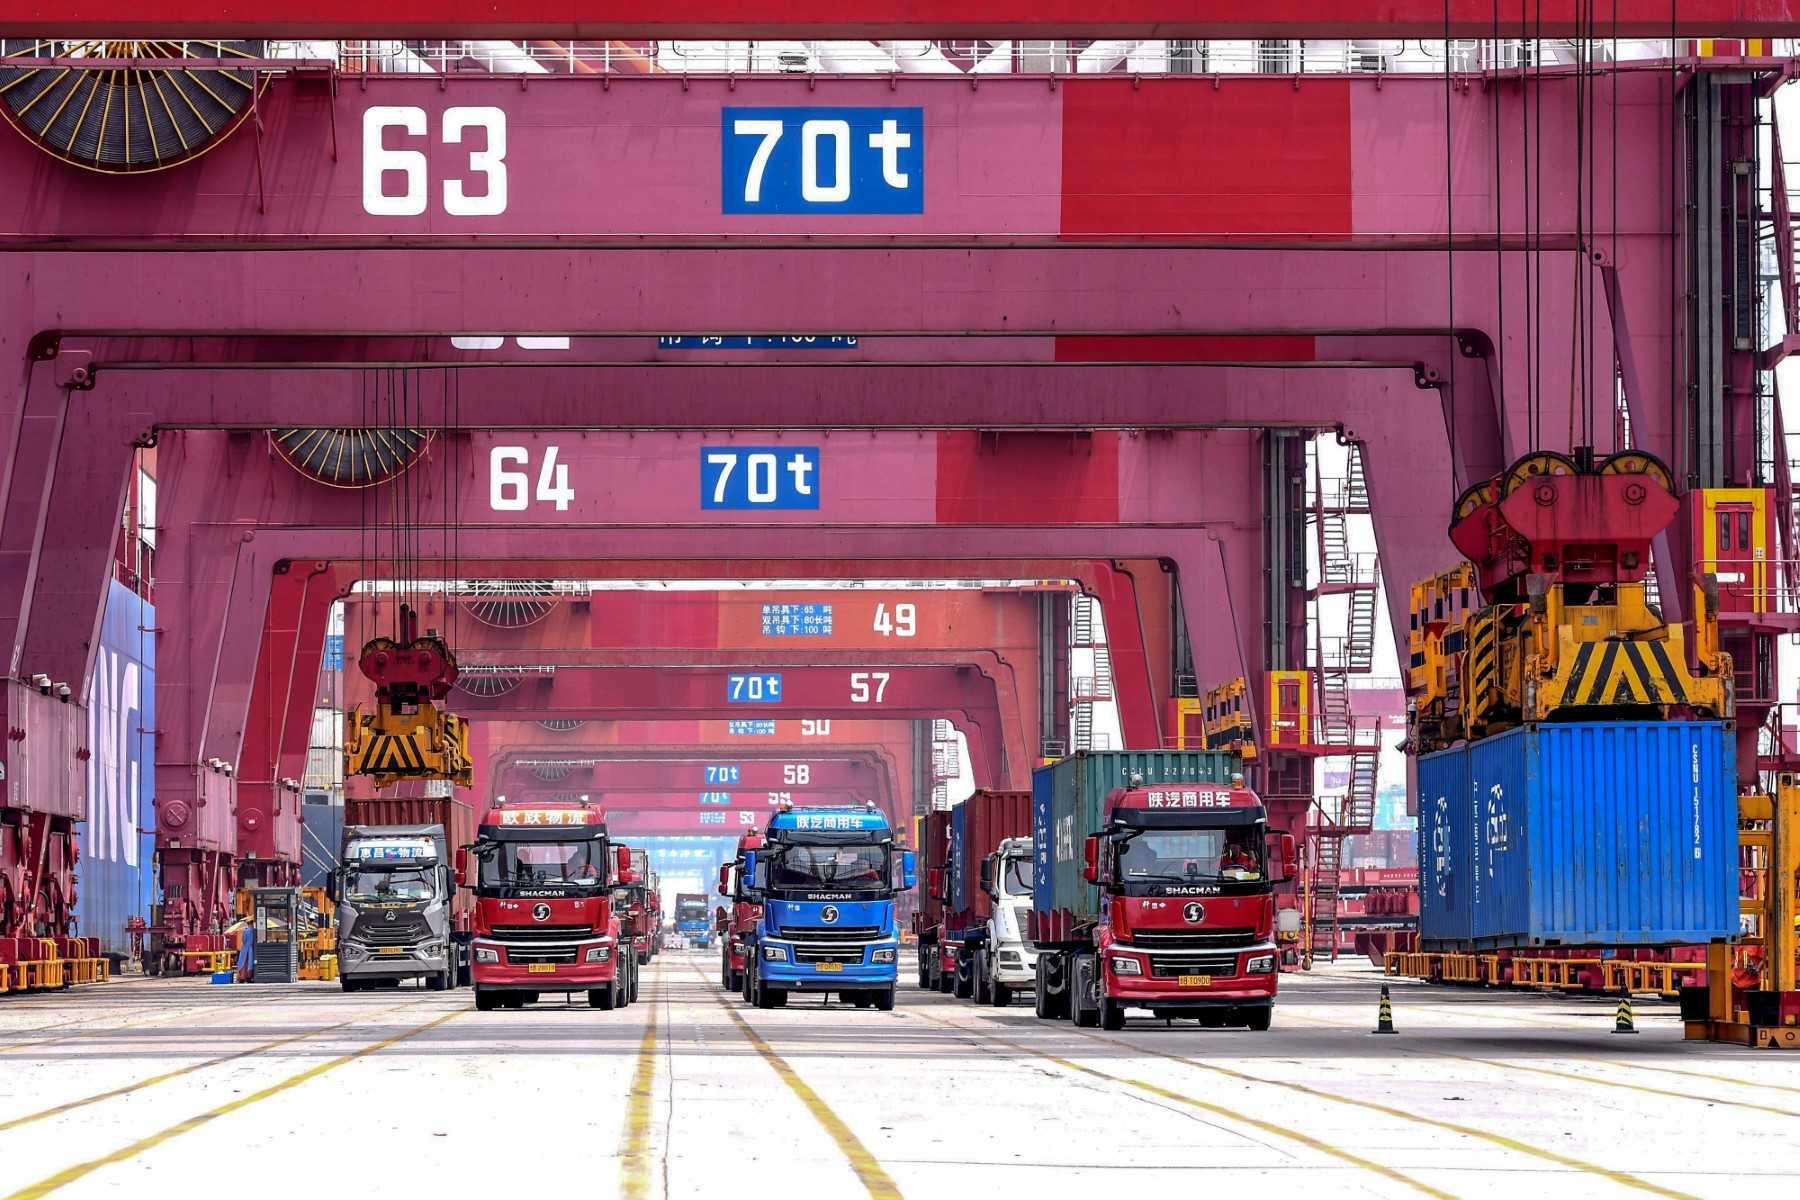 Cranes load containers onto trucks at a port in Qingdao, in China's eastern Shandong province on July 13. Photo: AFP